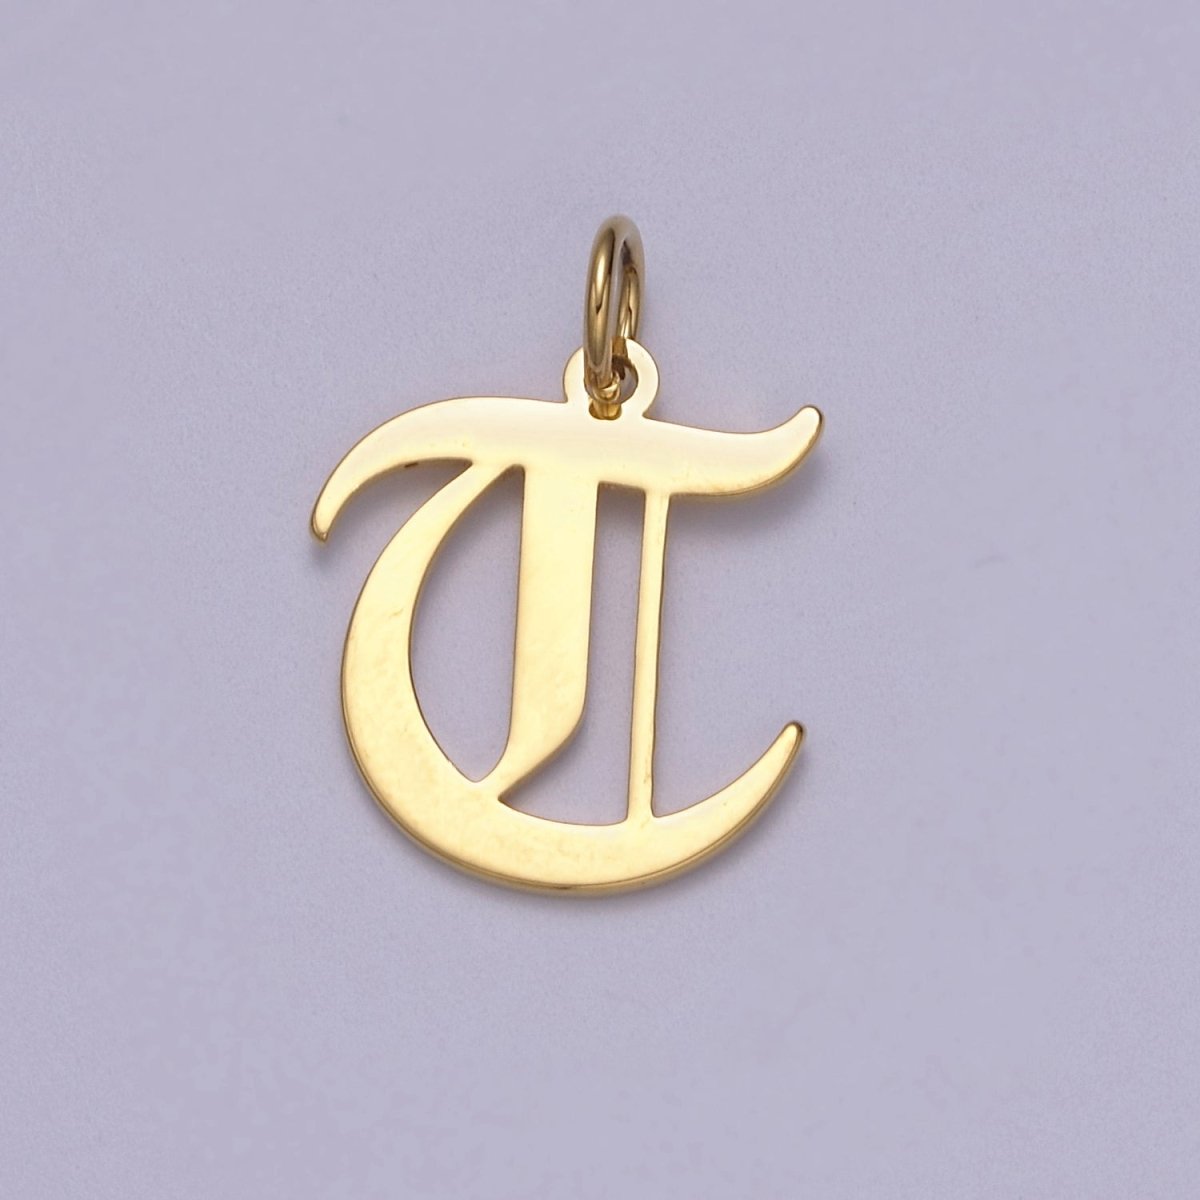 14k Gold Filled Old English Font Initial Letters Pendant Charm Wholesale Jewelry Supplies W-001 to W-027 - DLUXCA